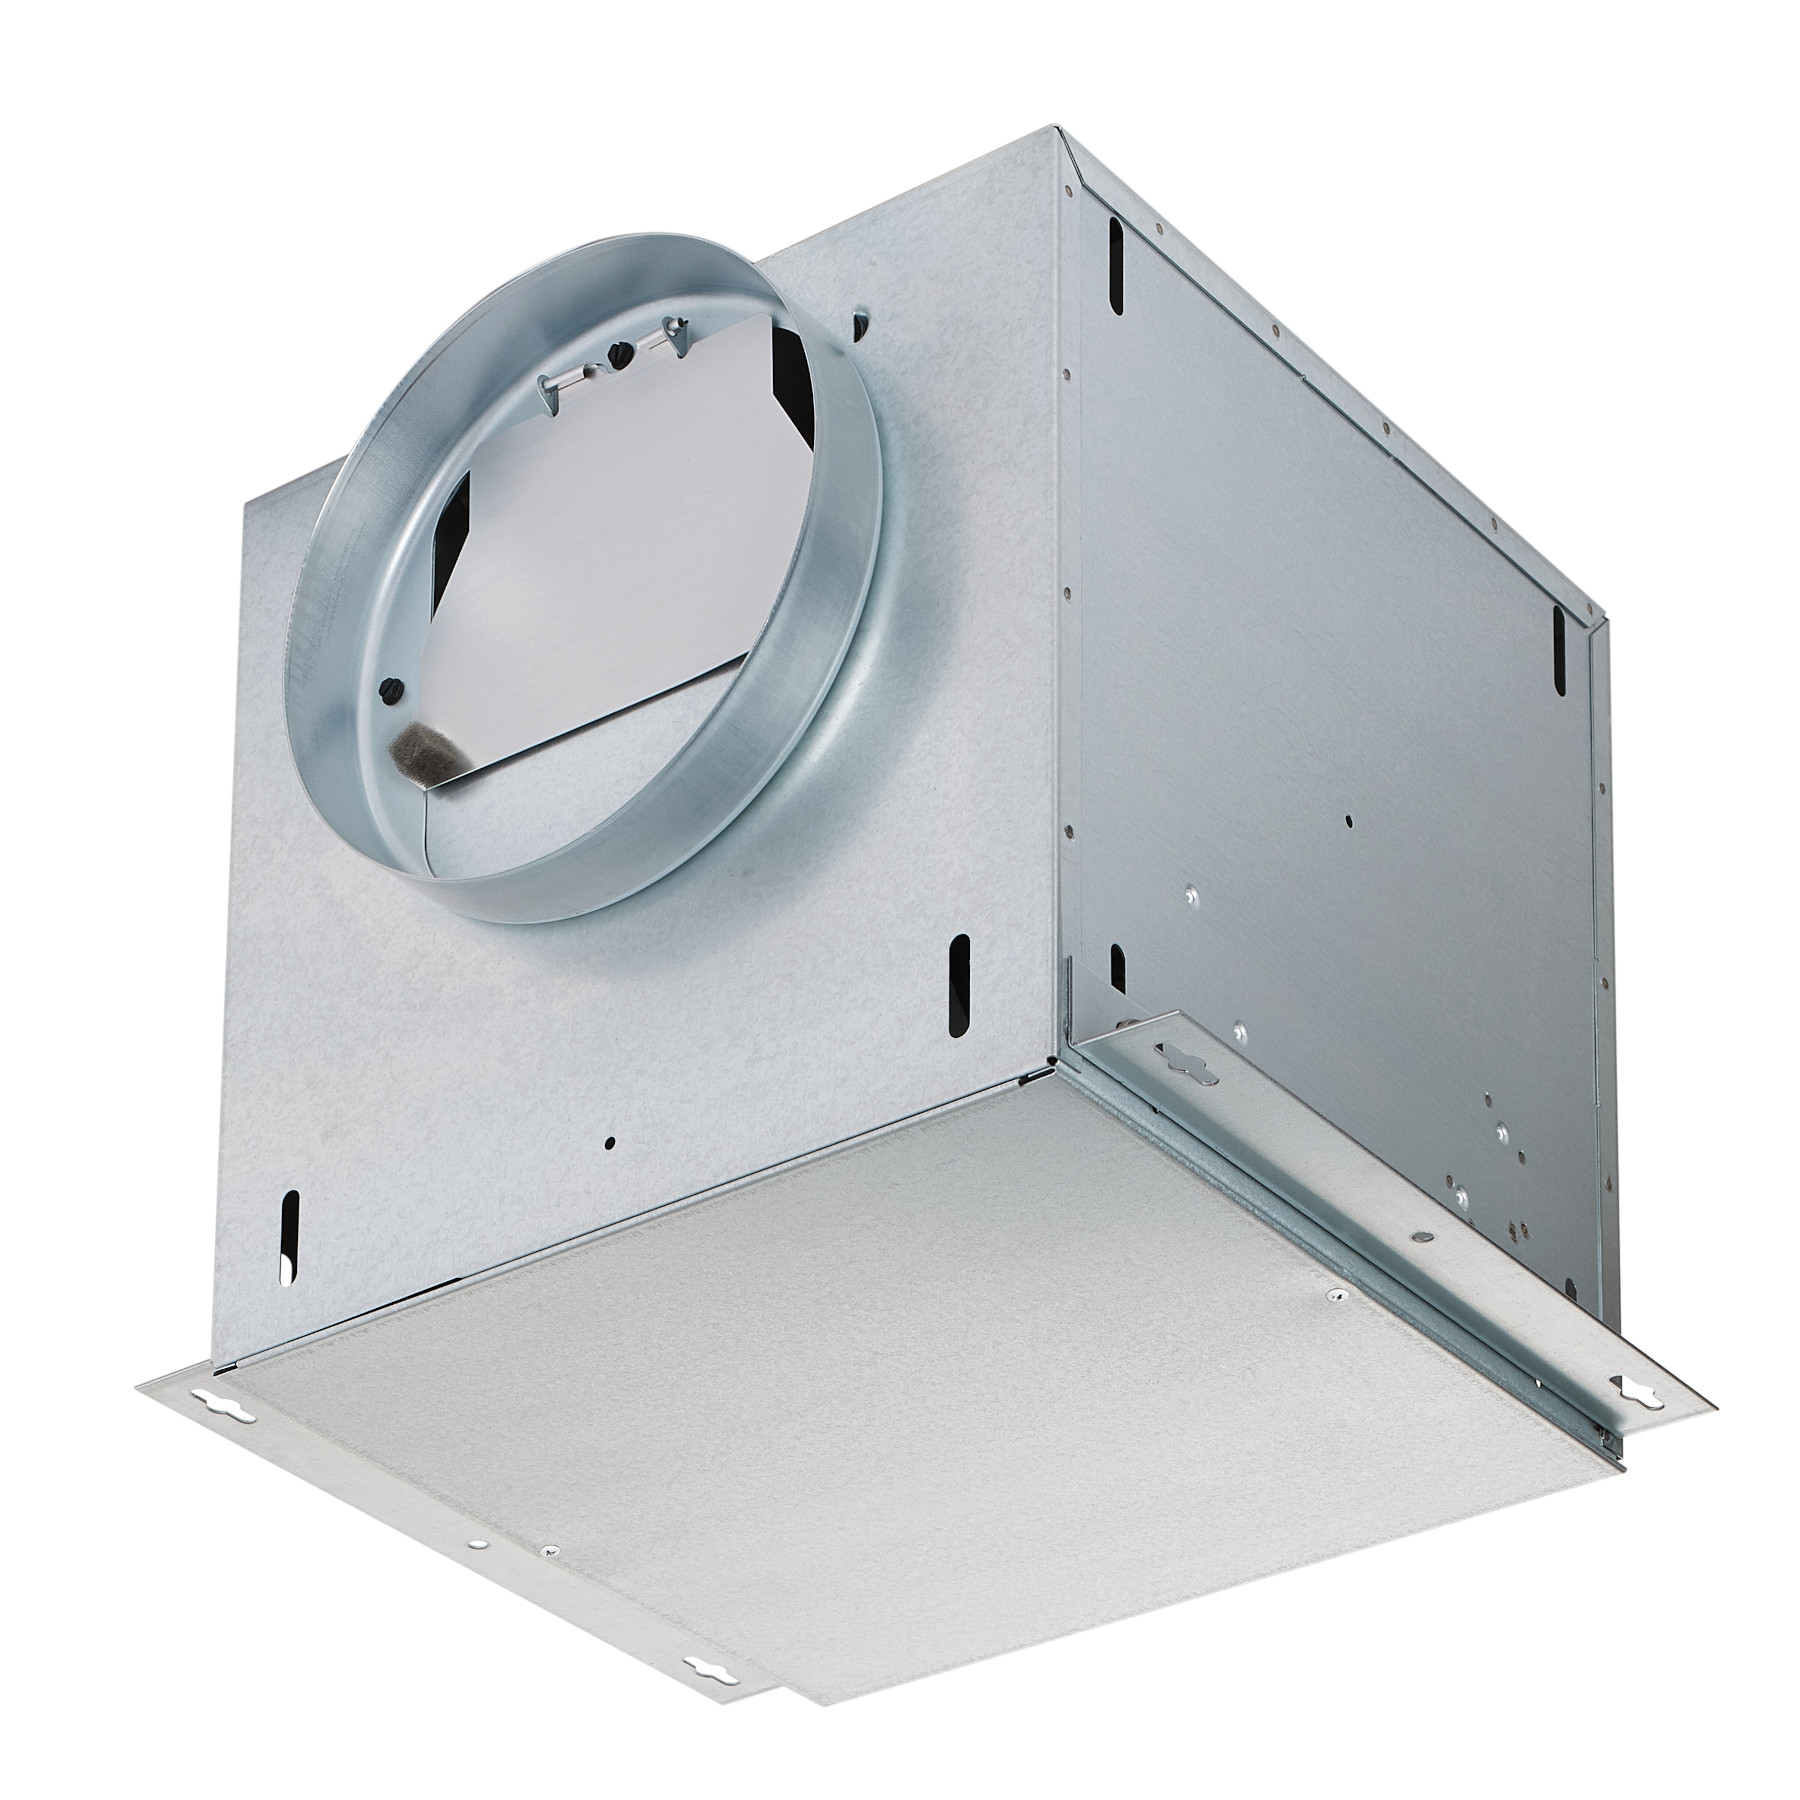 High-Capacity, Light Commercial 106 CFM InLine Ventilation Fan, ENERGY STAR® certified